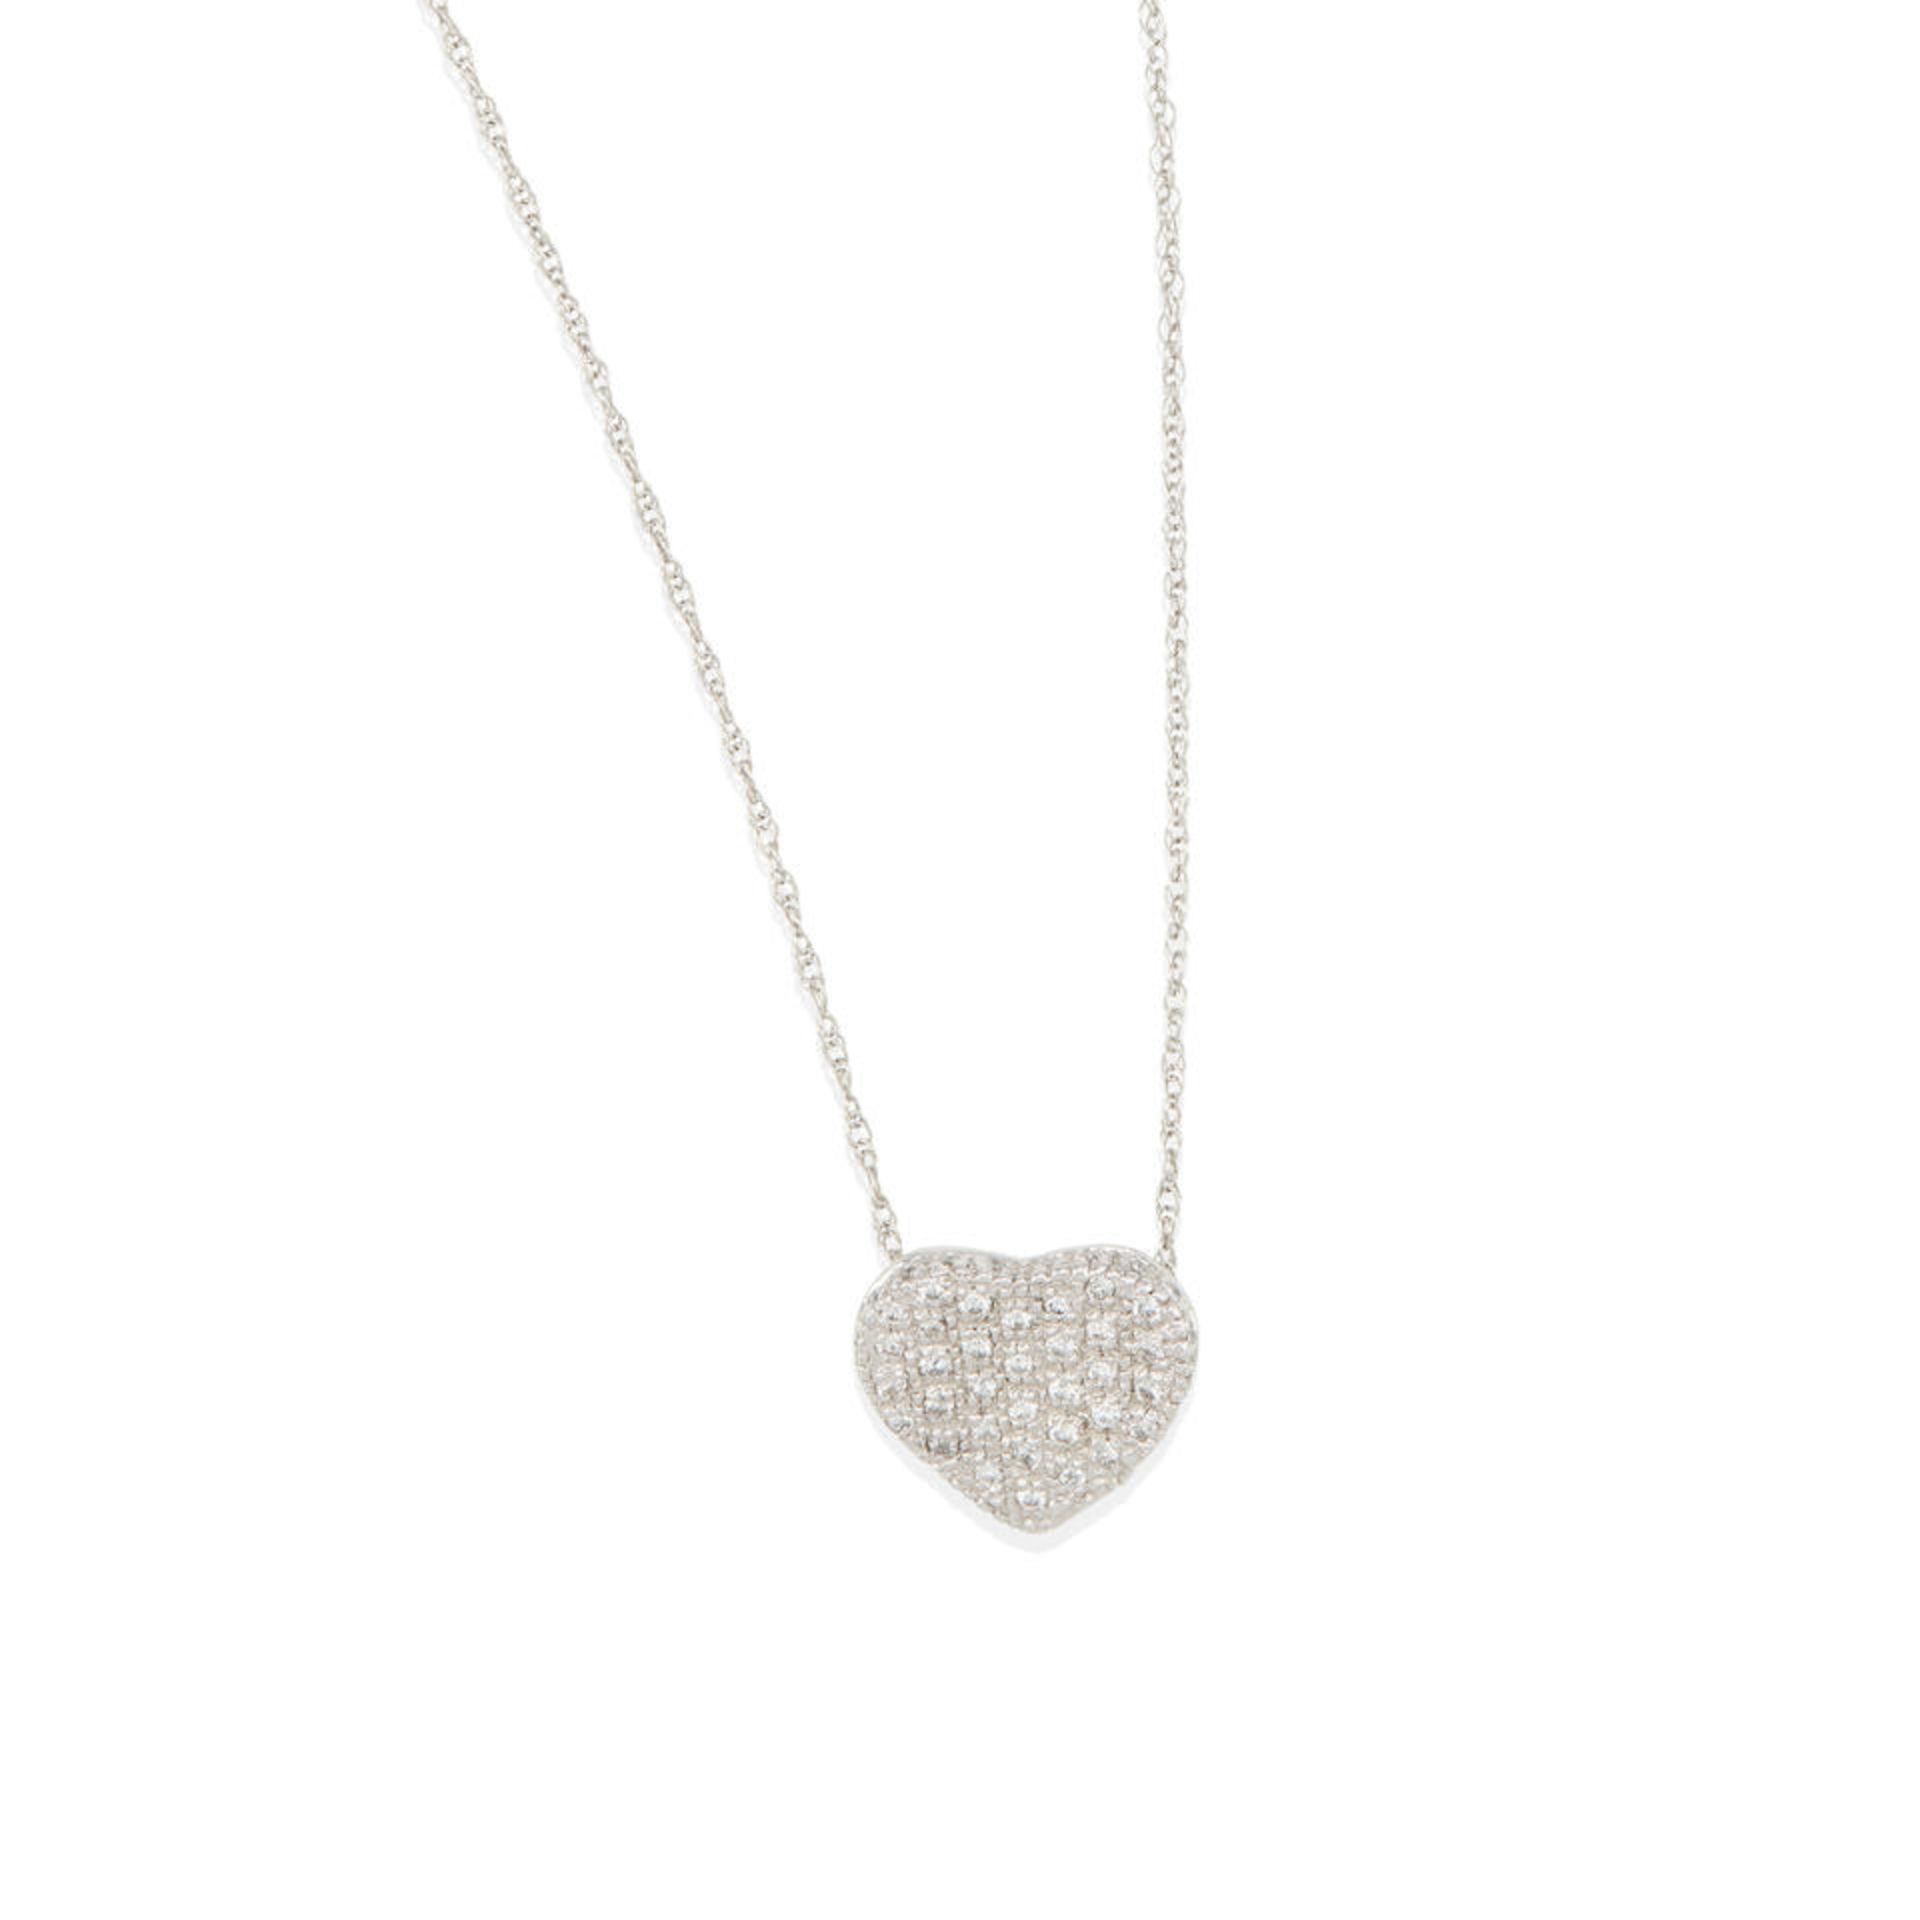 AN 18K WHITE GOLD AND DIAMOND HEART PENDANT NECKLACE